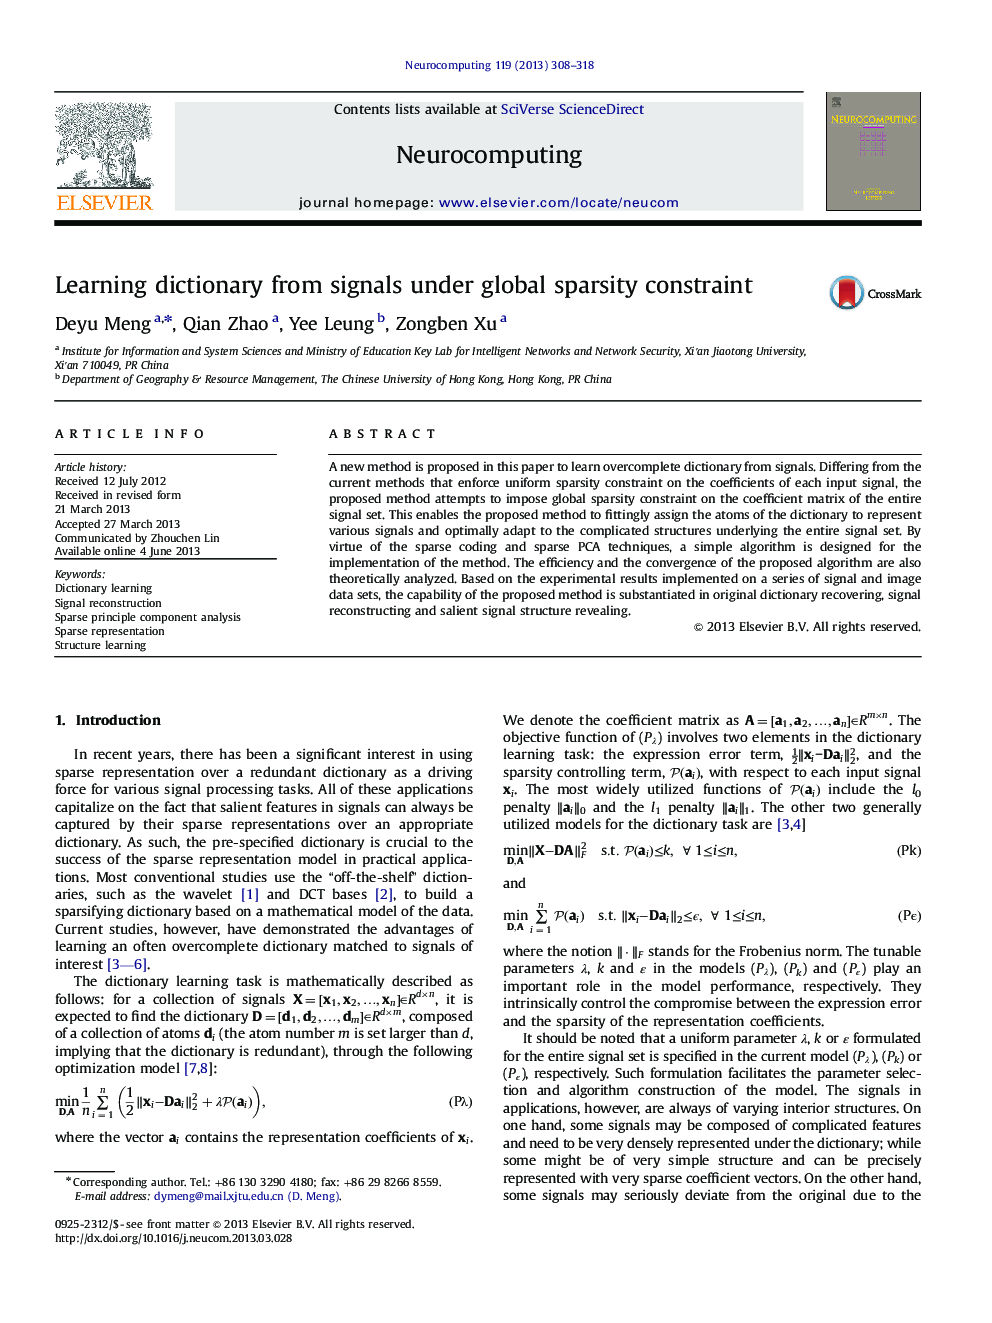 Learning dictionary from signals under global sparsity constraint